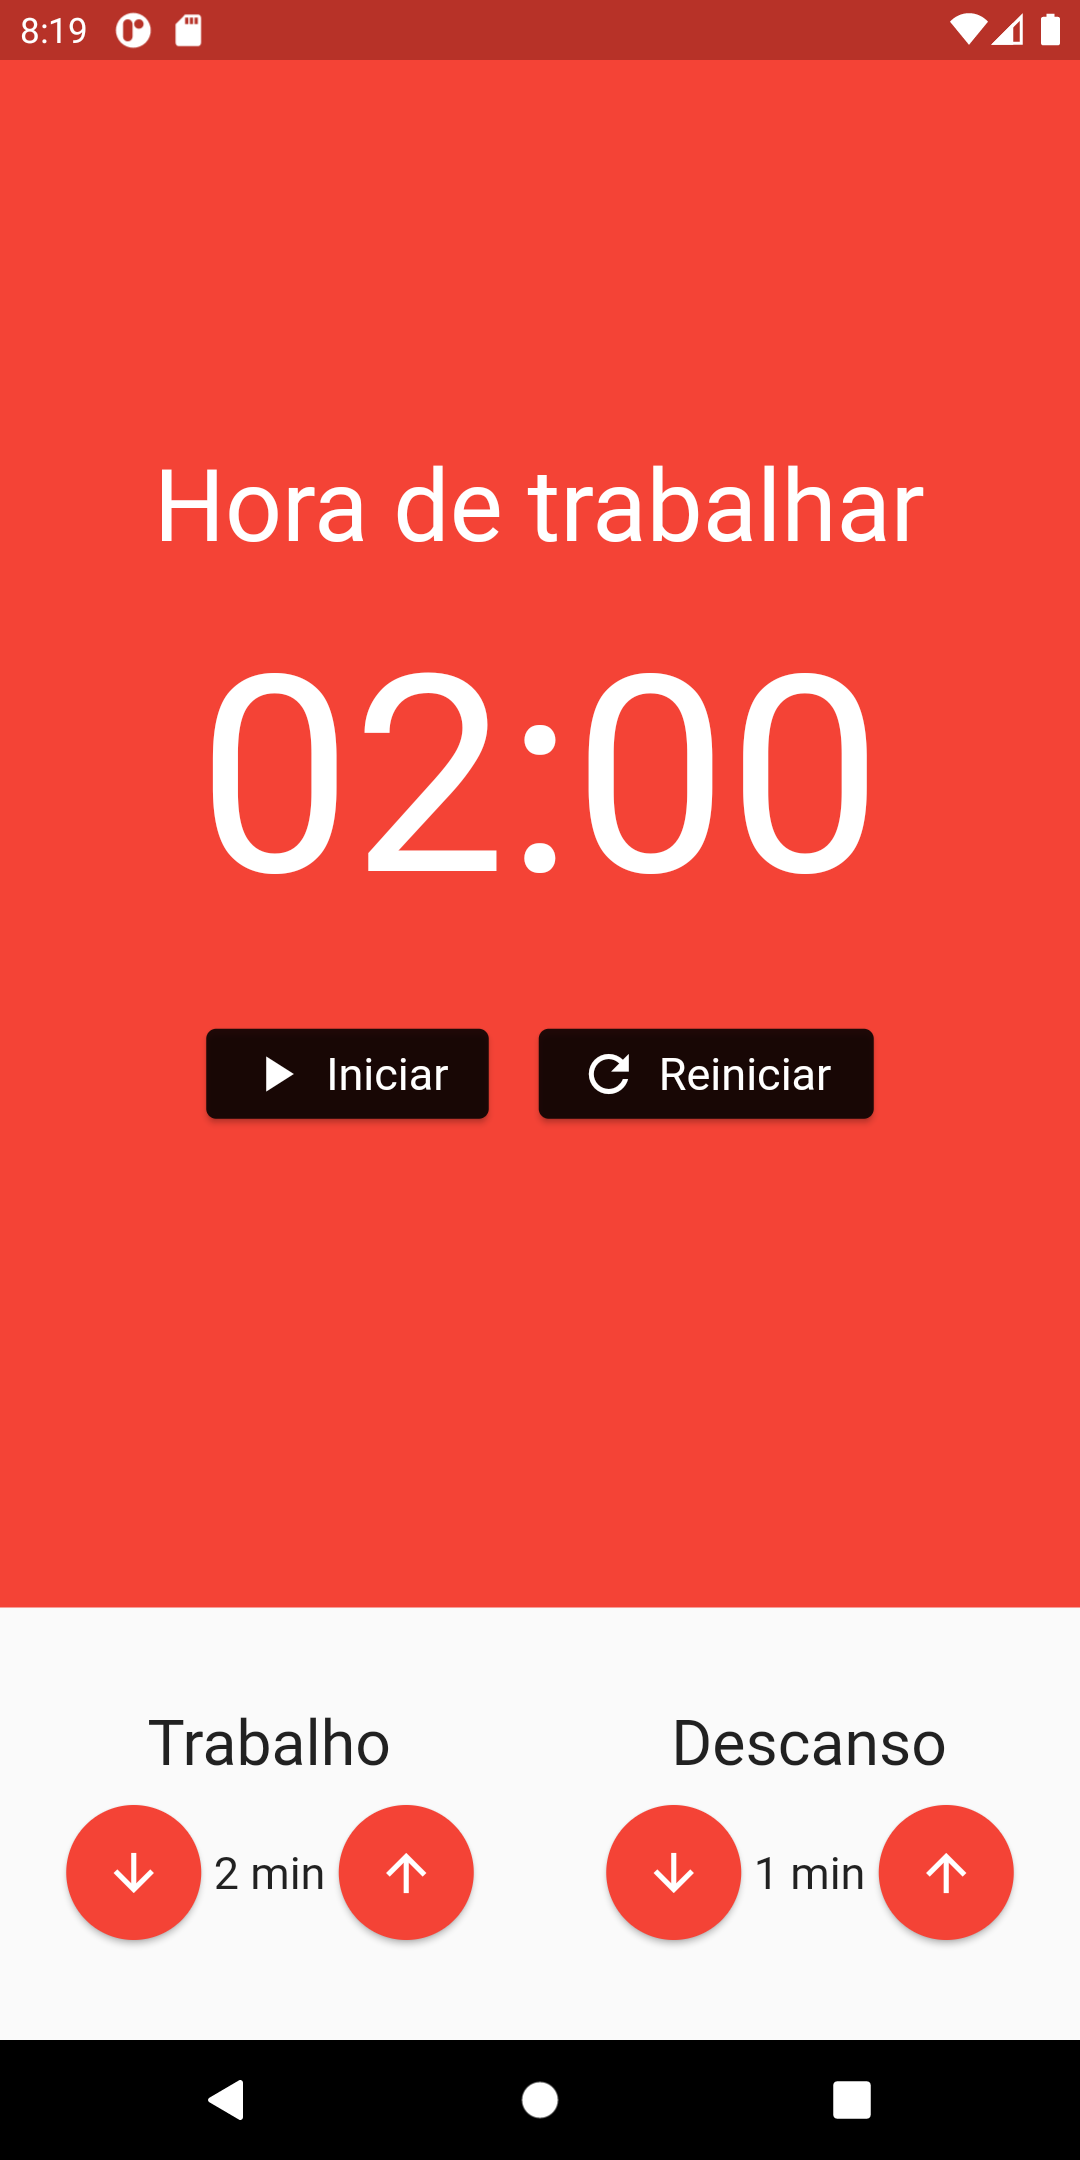 App that consists of using a stopwatch to divide work and rest into different periods